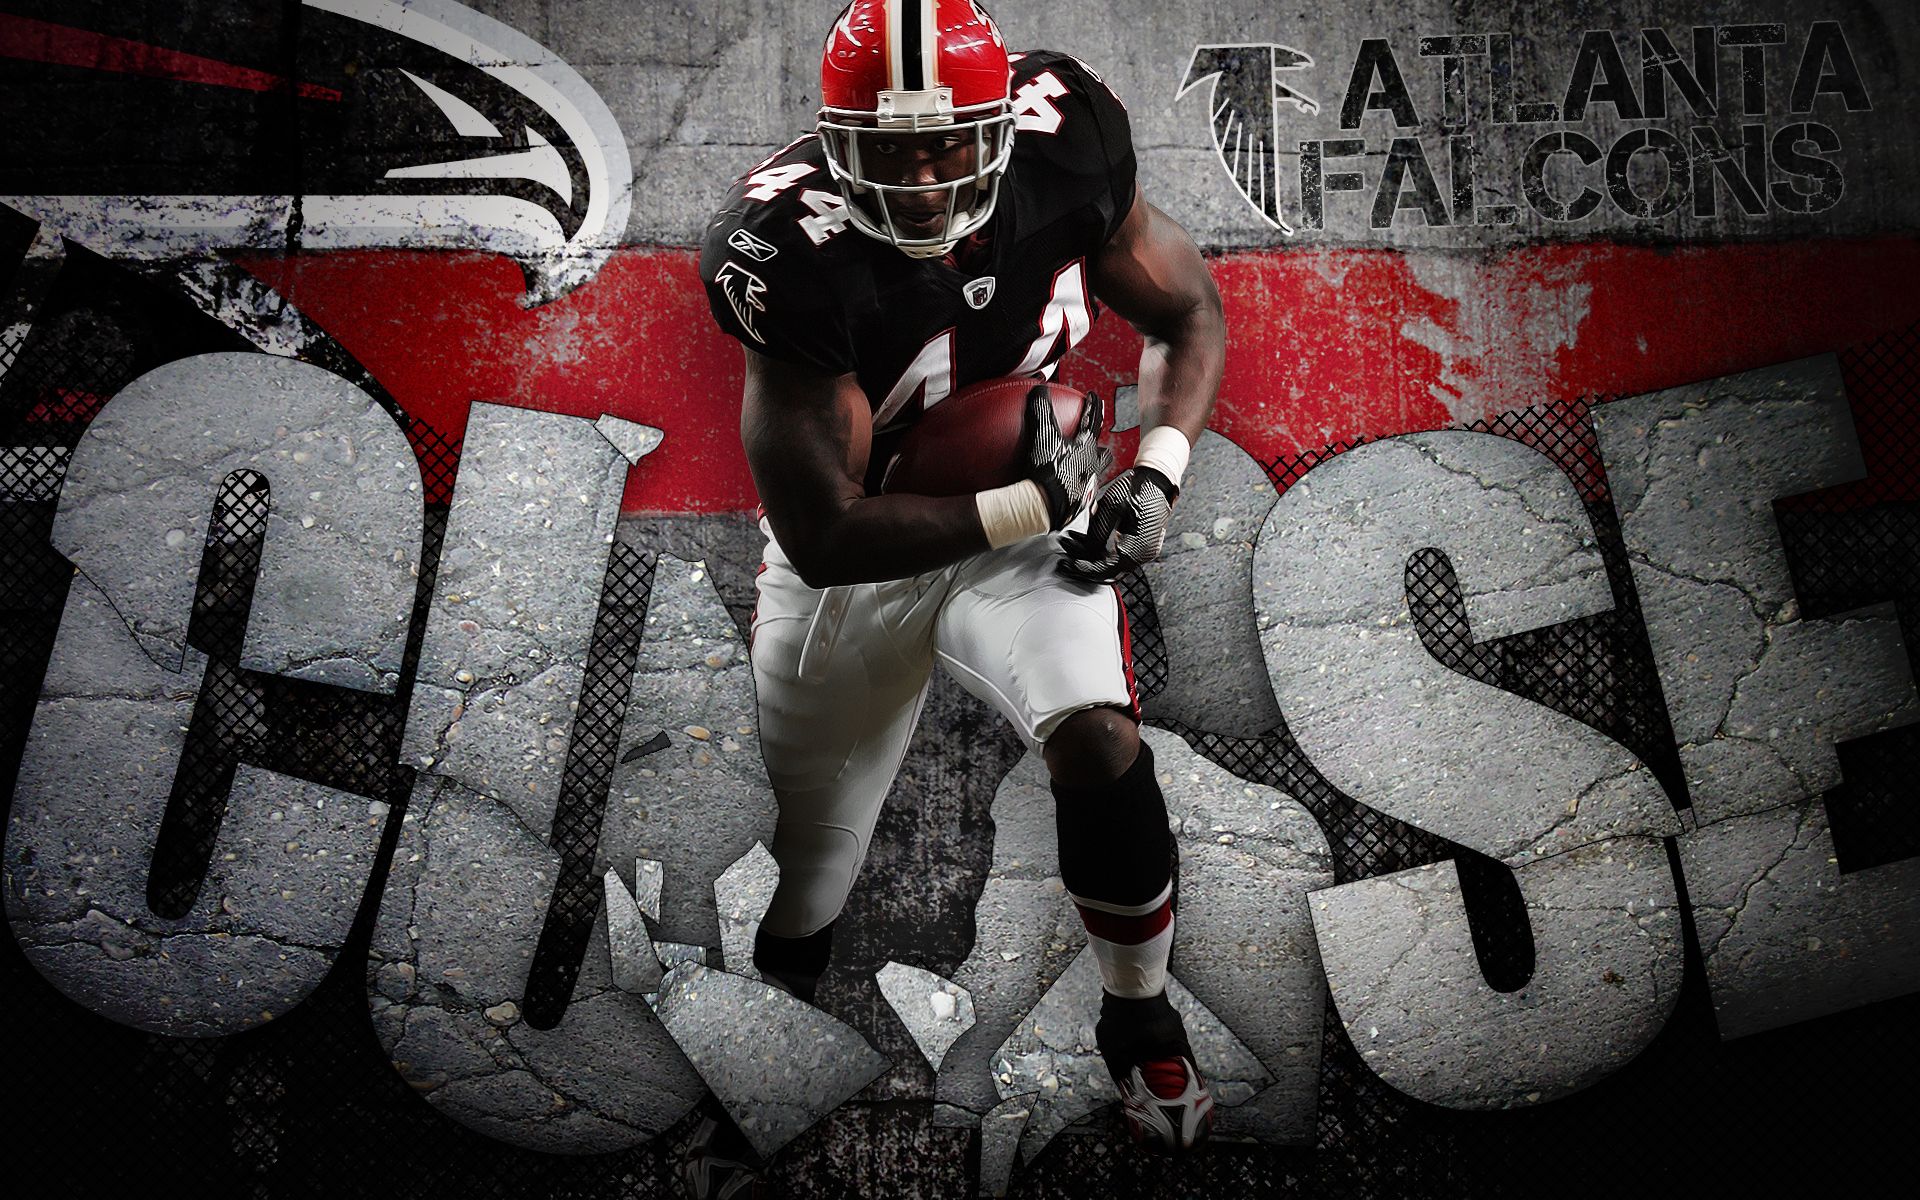 Breaking the Curse wallpaper - Graphics and Multimedia - Falcons ...